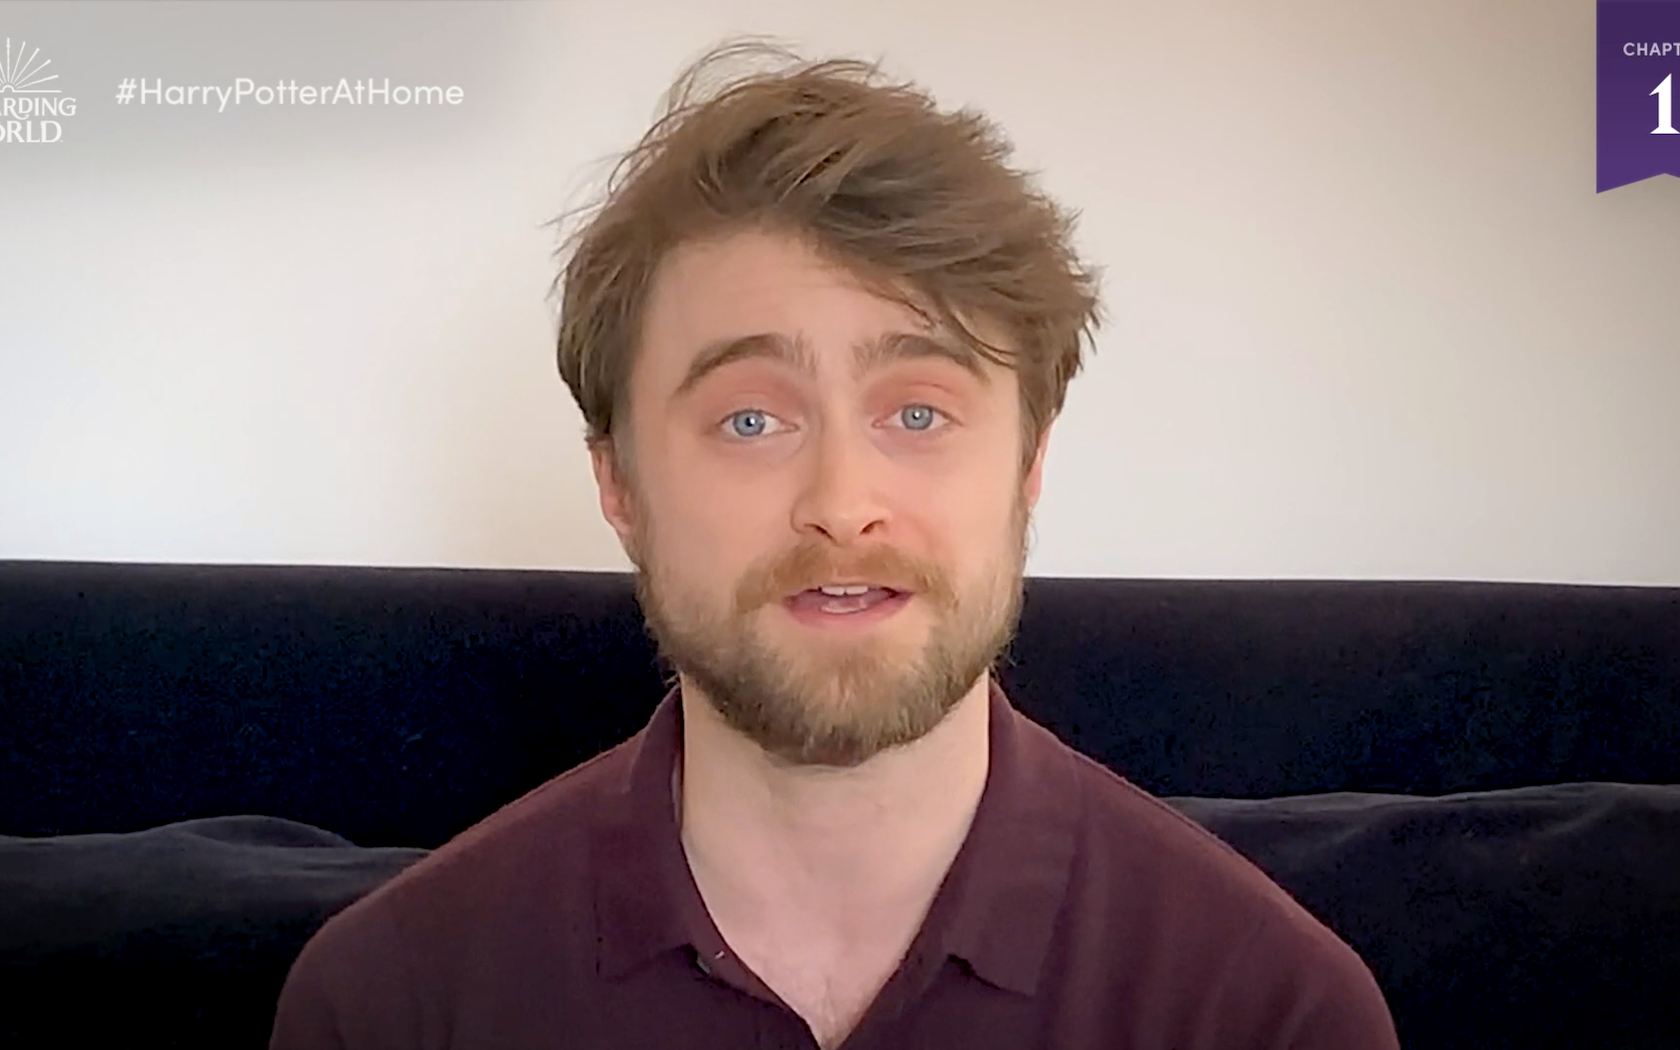 Harry Potter Audiobook: Listen To Daniel Radcliffe Read The First Book